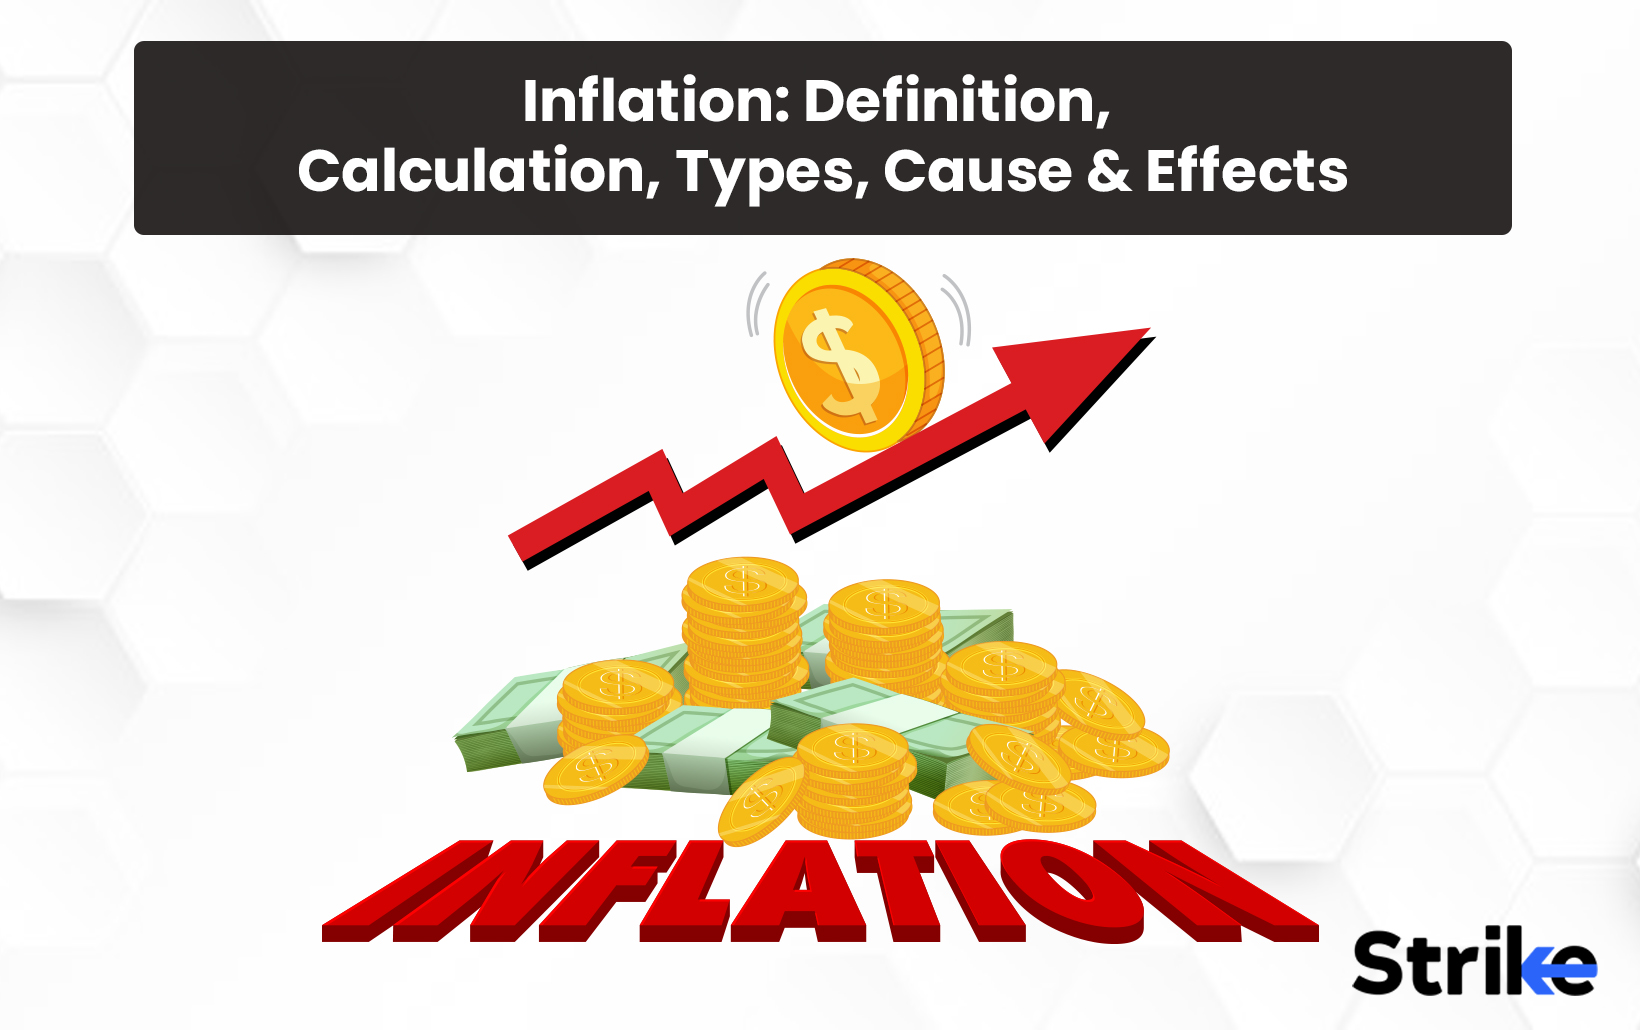 Inflation: Definition, Calculation, Types, Cause & Effects